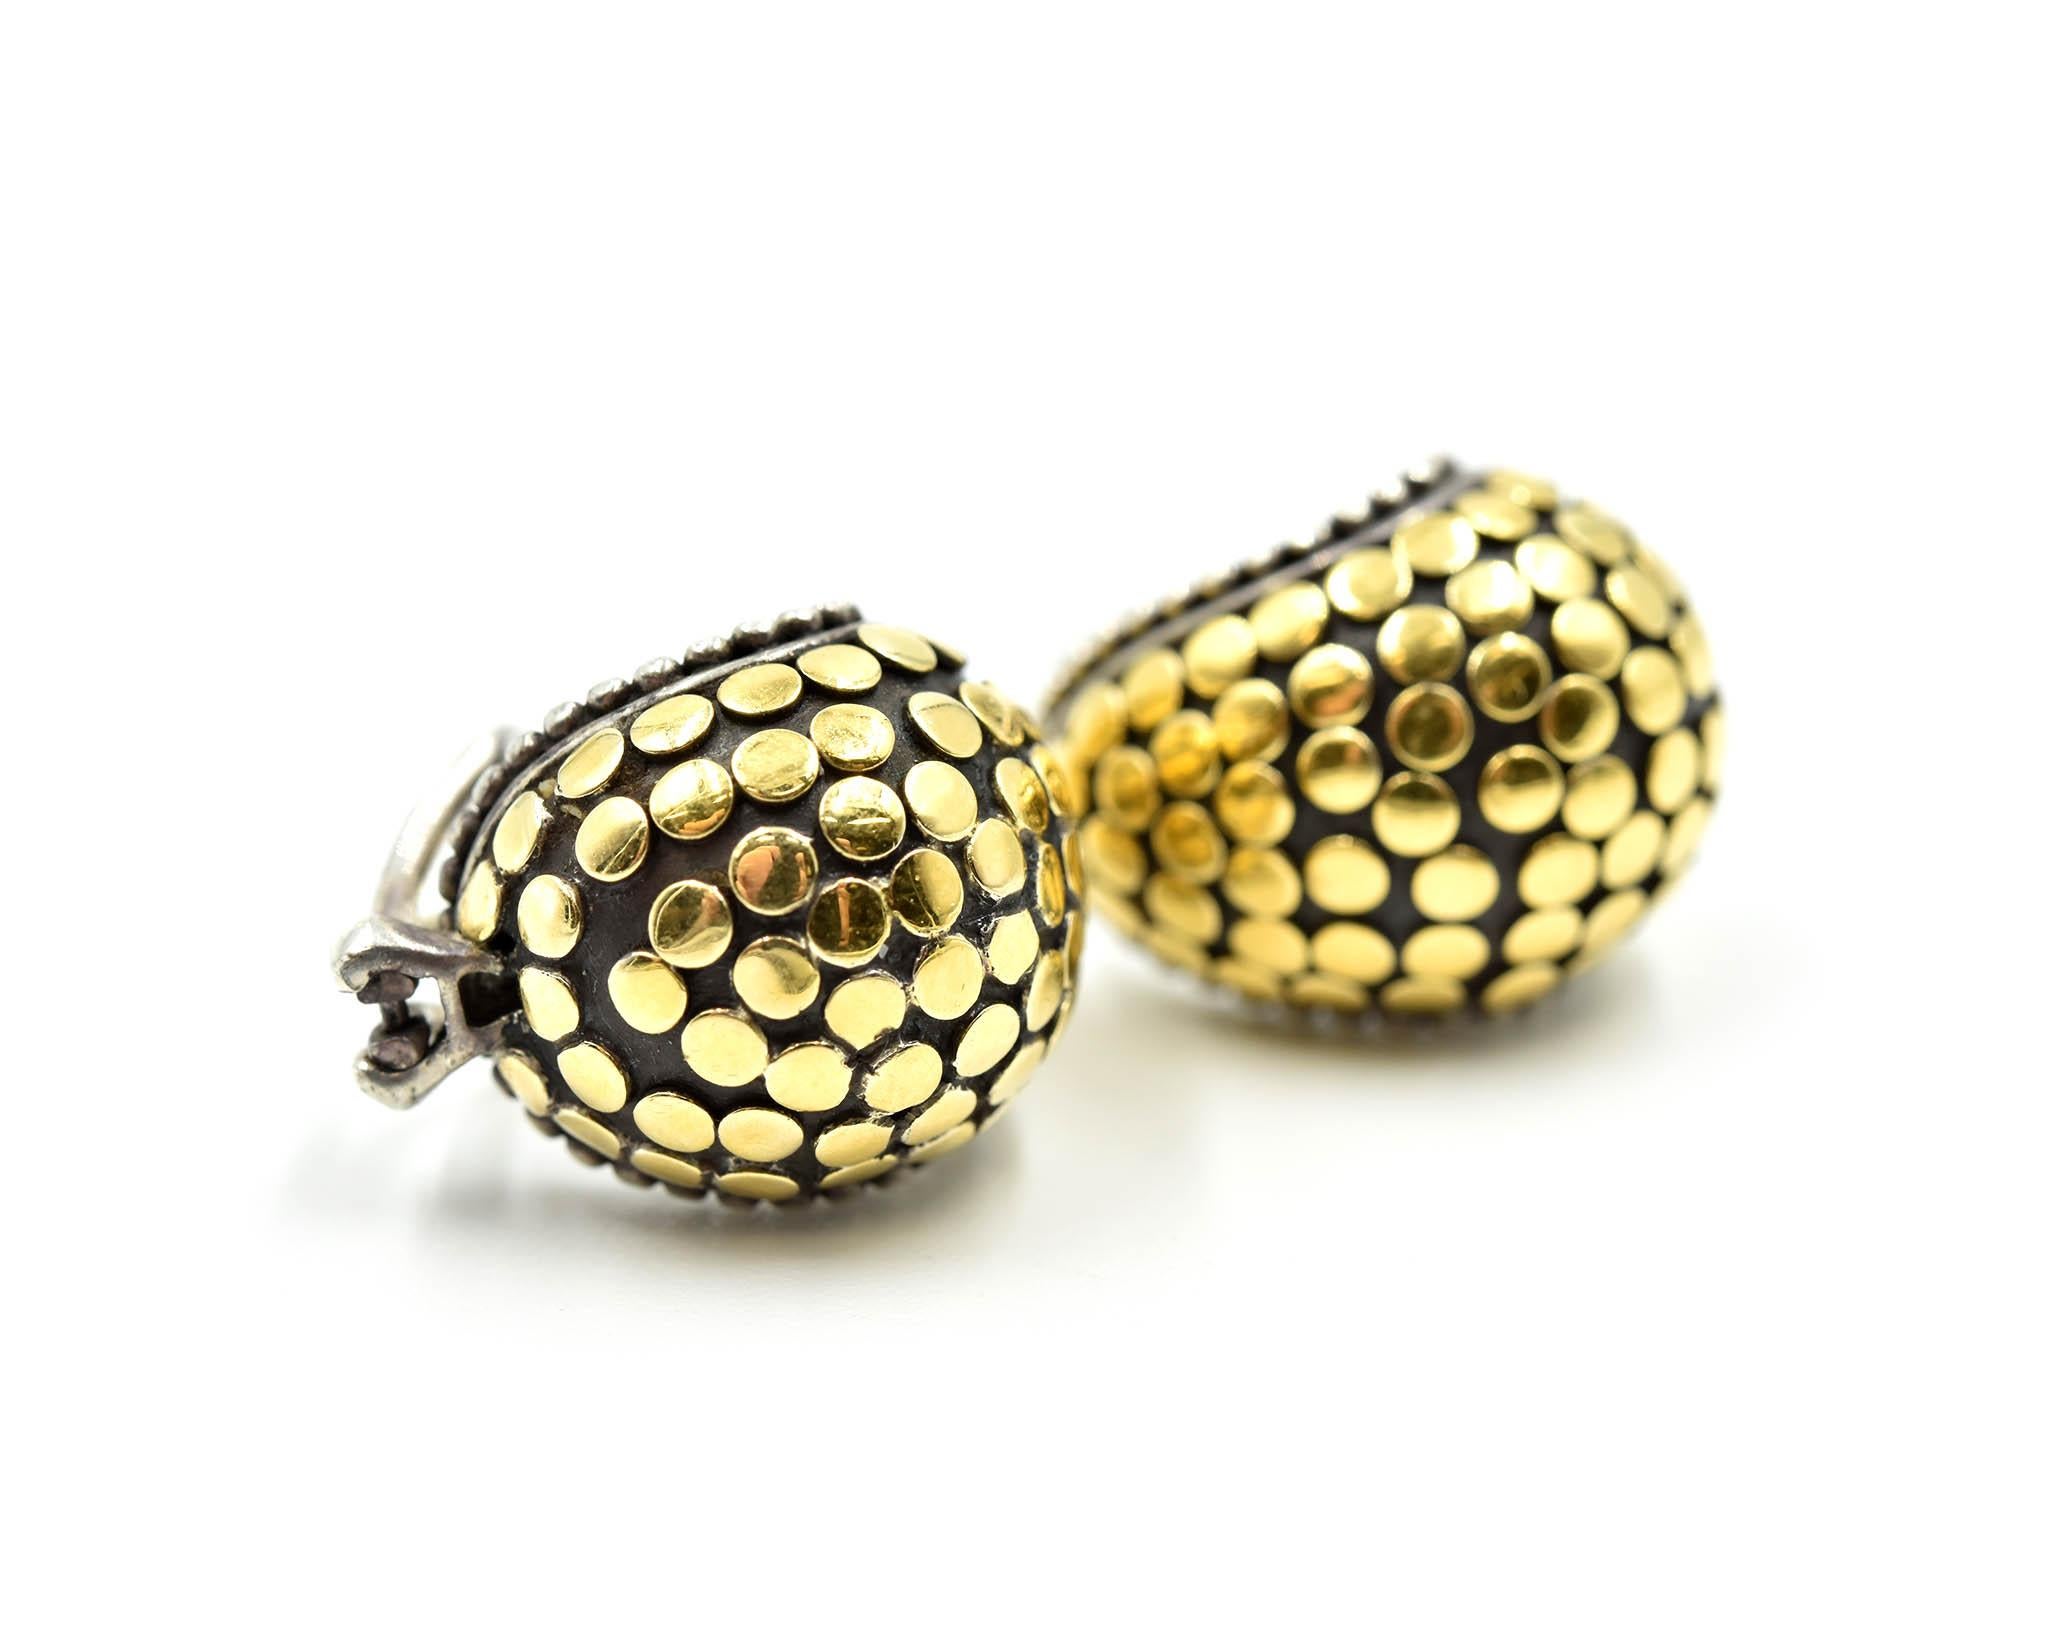 This is a classic John Hardy design with a dot collection! This pair of sterling silver John Hardy dot earrings is crafted with 18k yellow gold dots. Each earring measures 16.17mm in length and 14.36mm in width. Each earring is set with omega backs